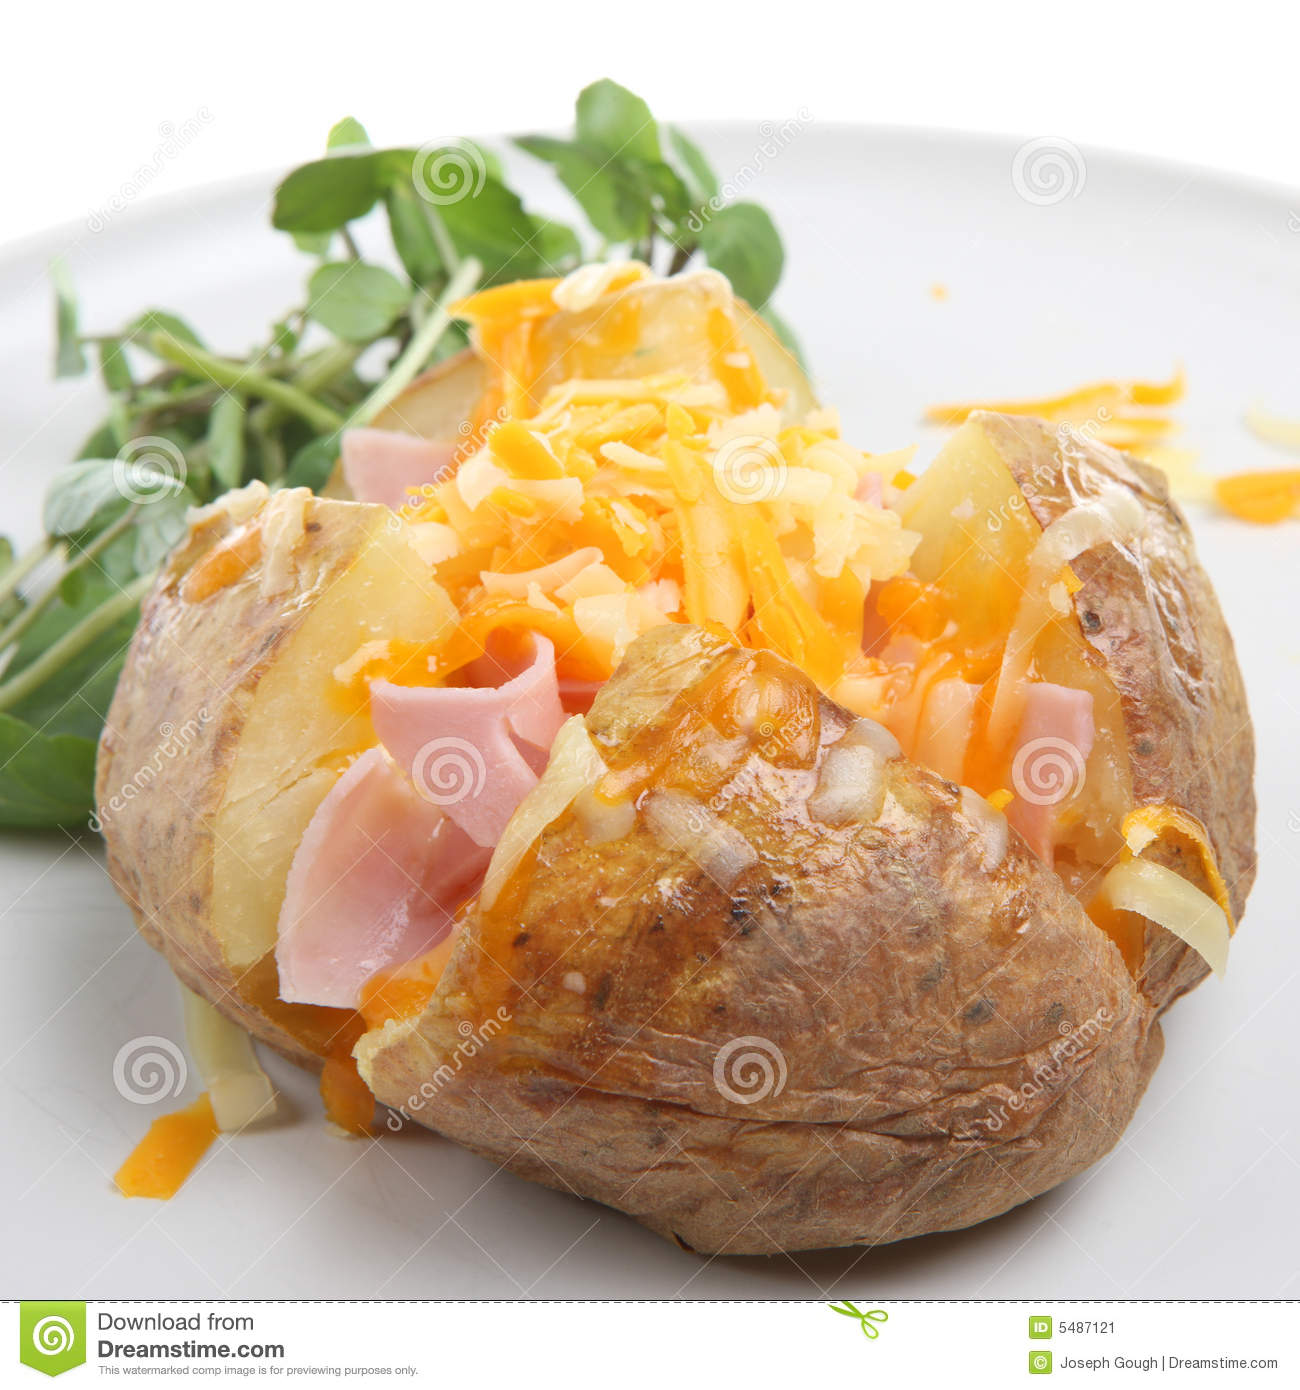 Baked Potato With Ham And Cheese Stock Image   Image  5487121